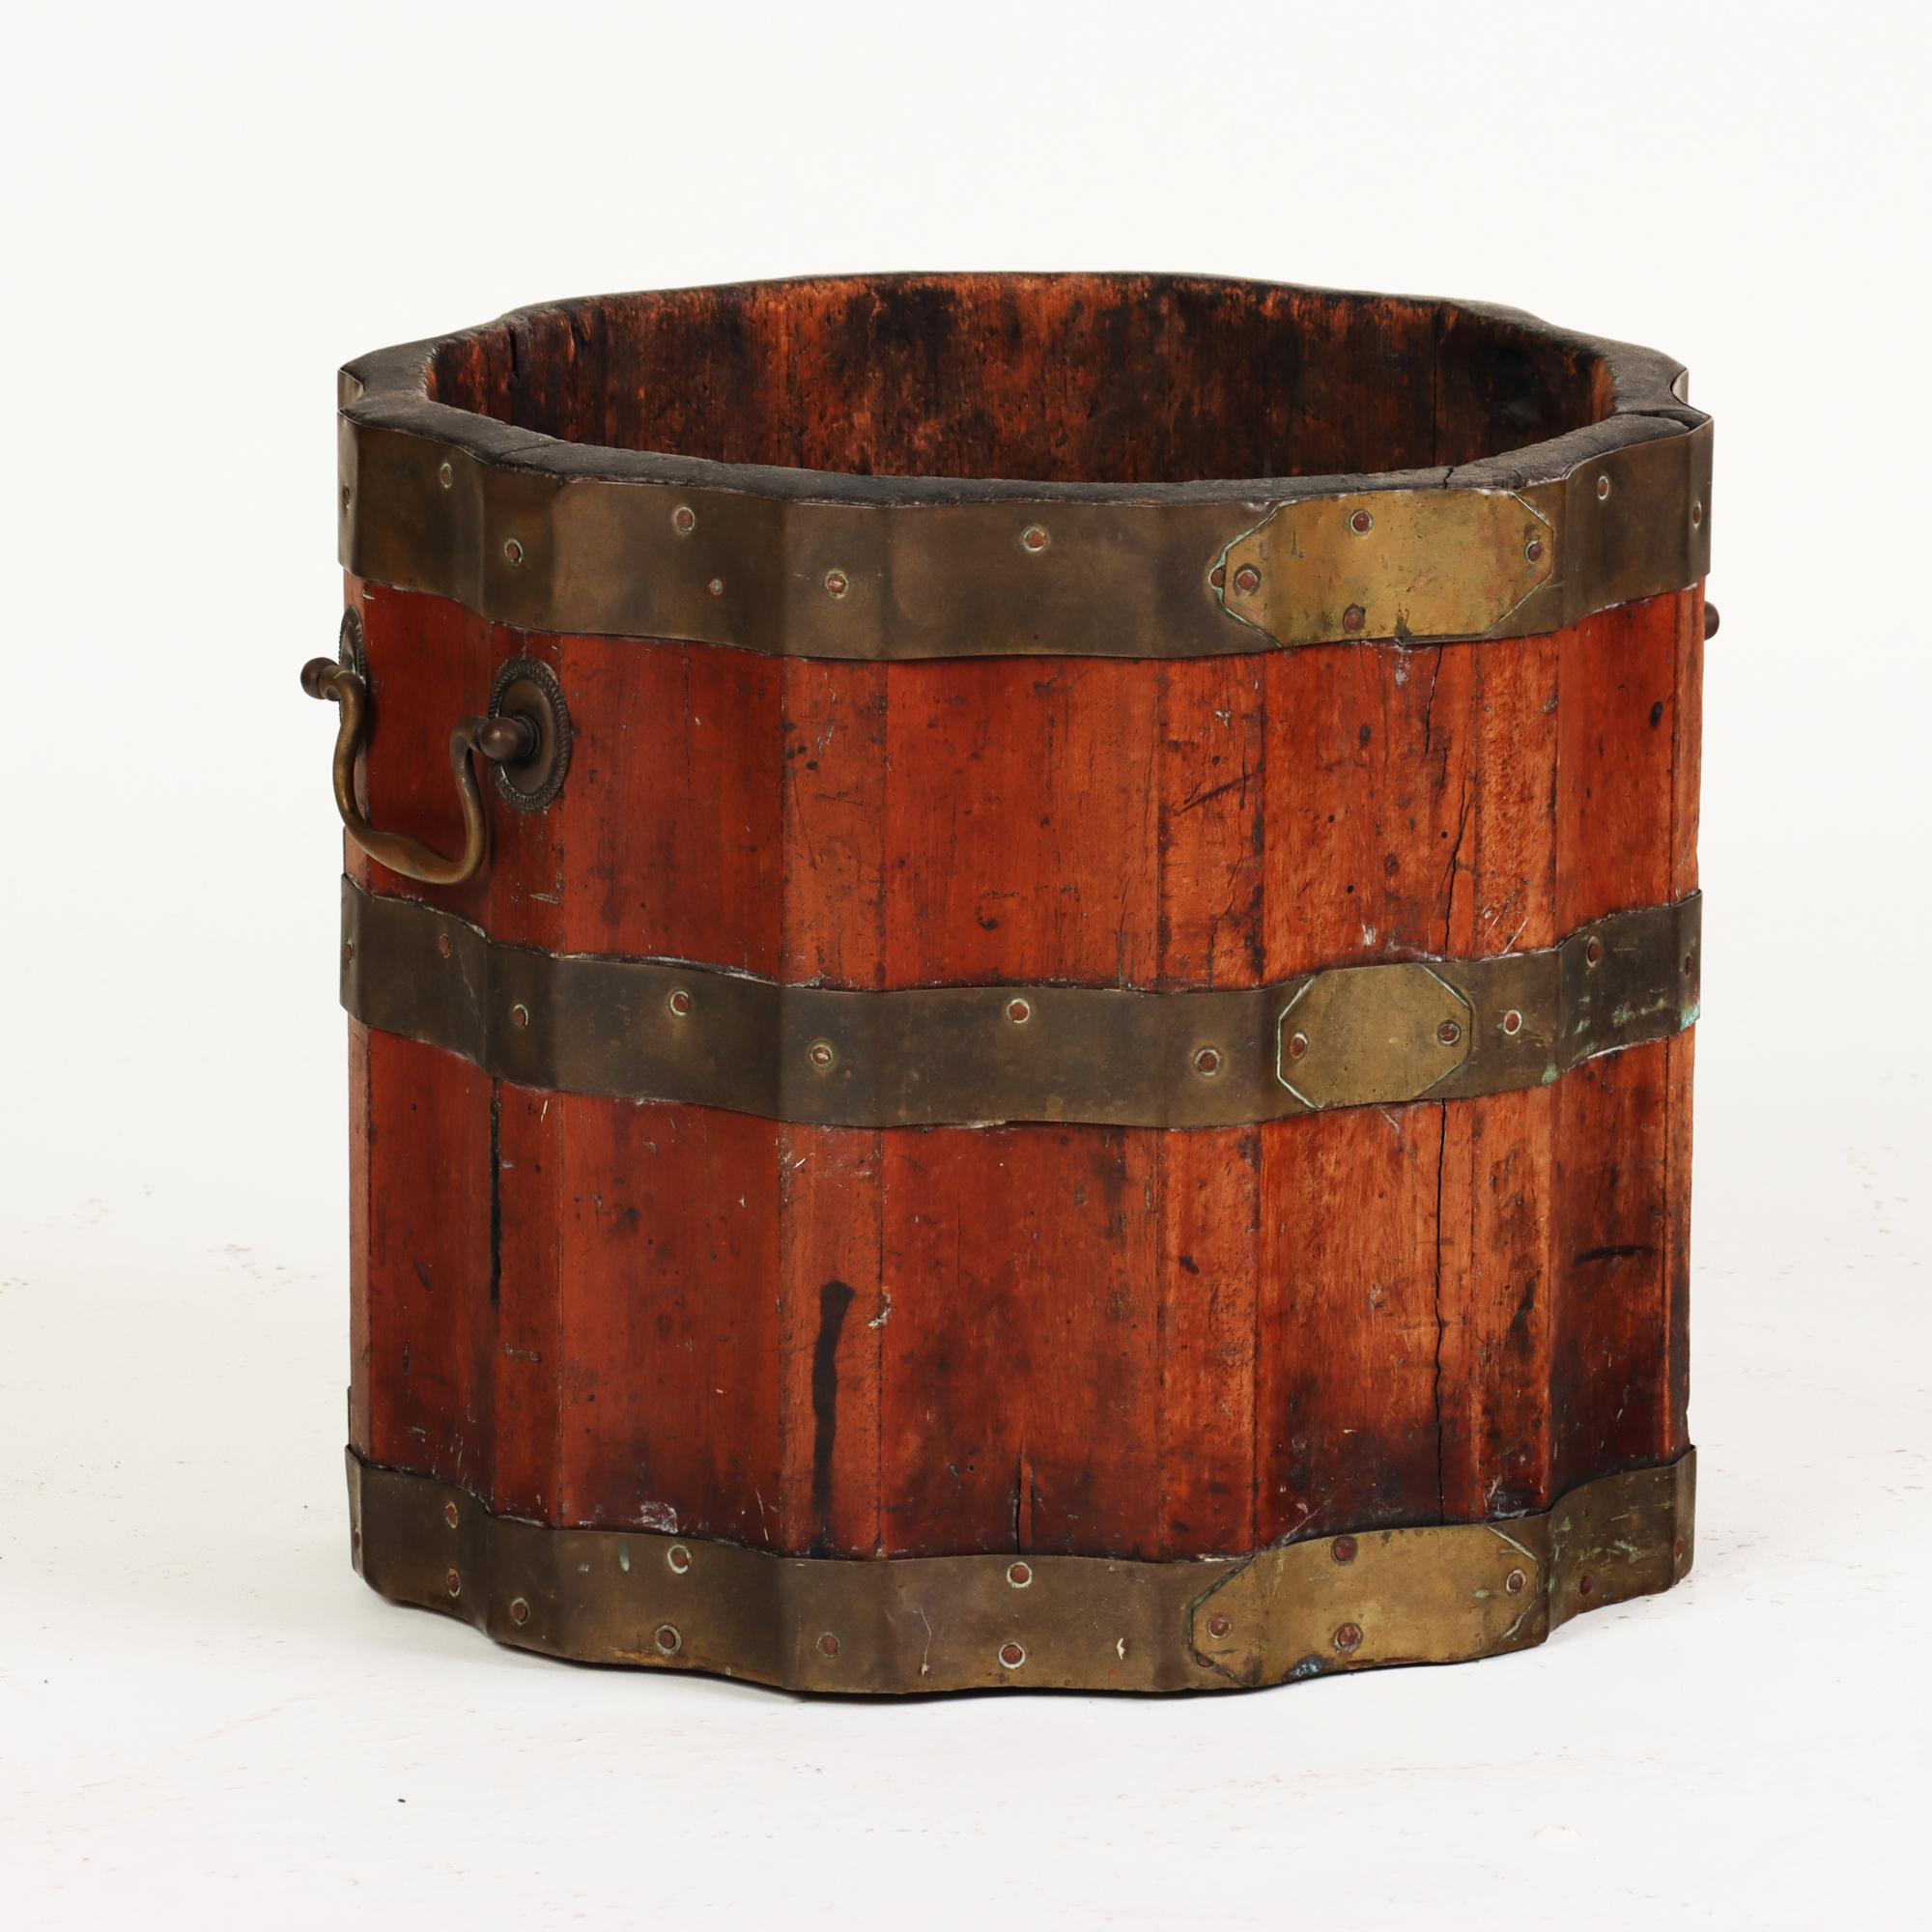 A beautiful rare fluted vintage wine barrel or bucket, with brass bands and handles, 19th C.
      